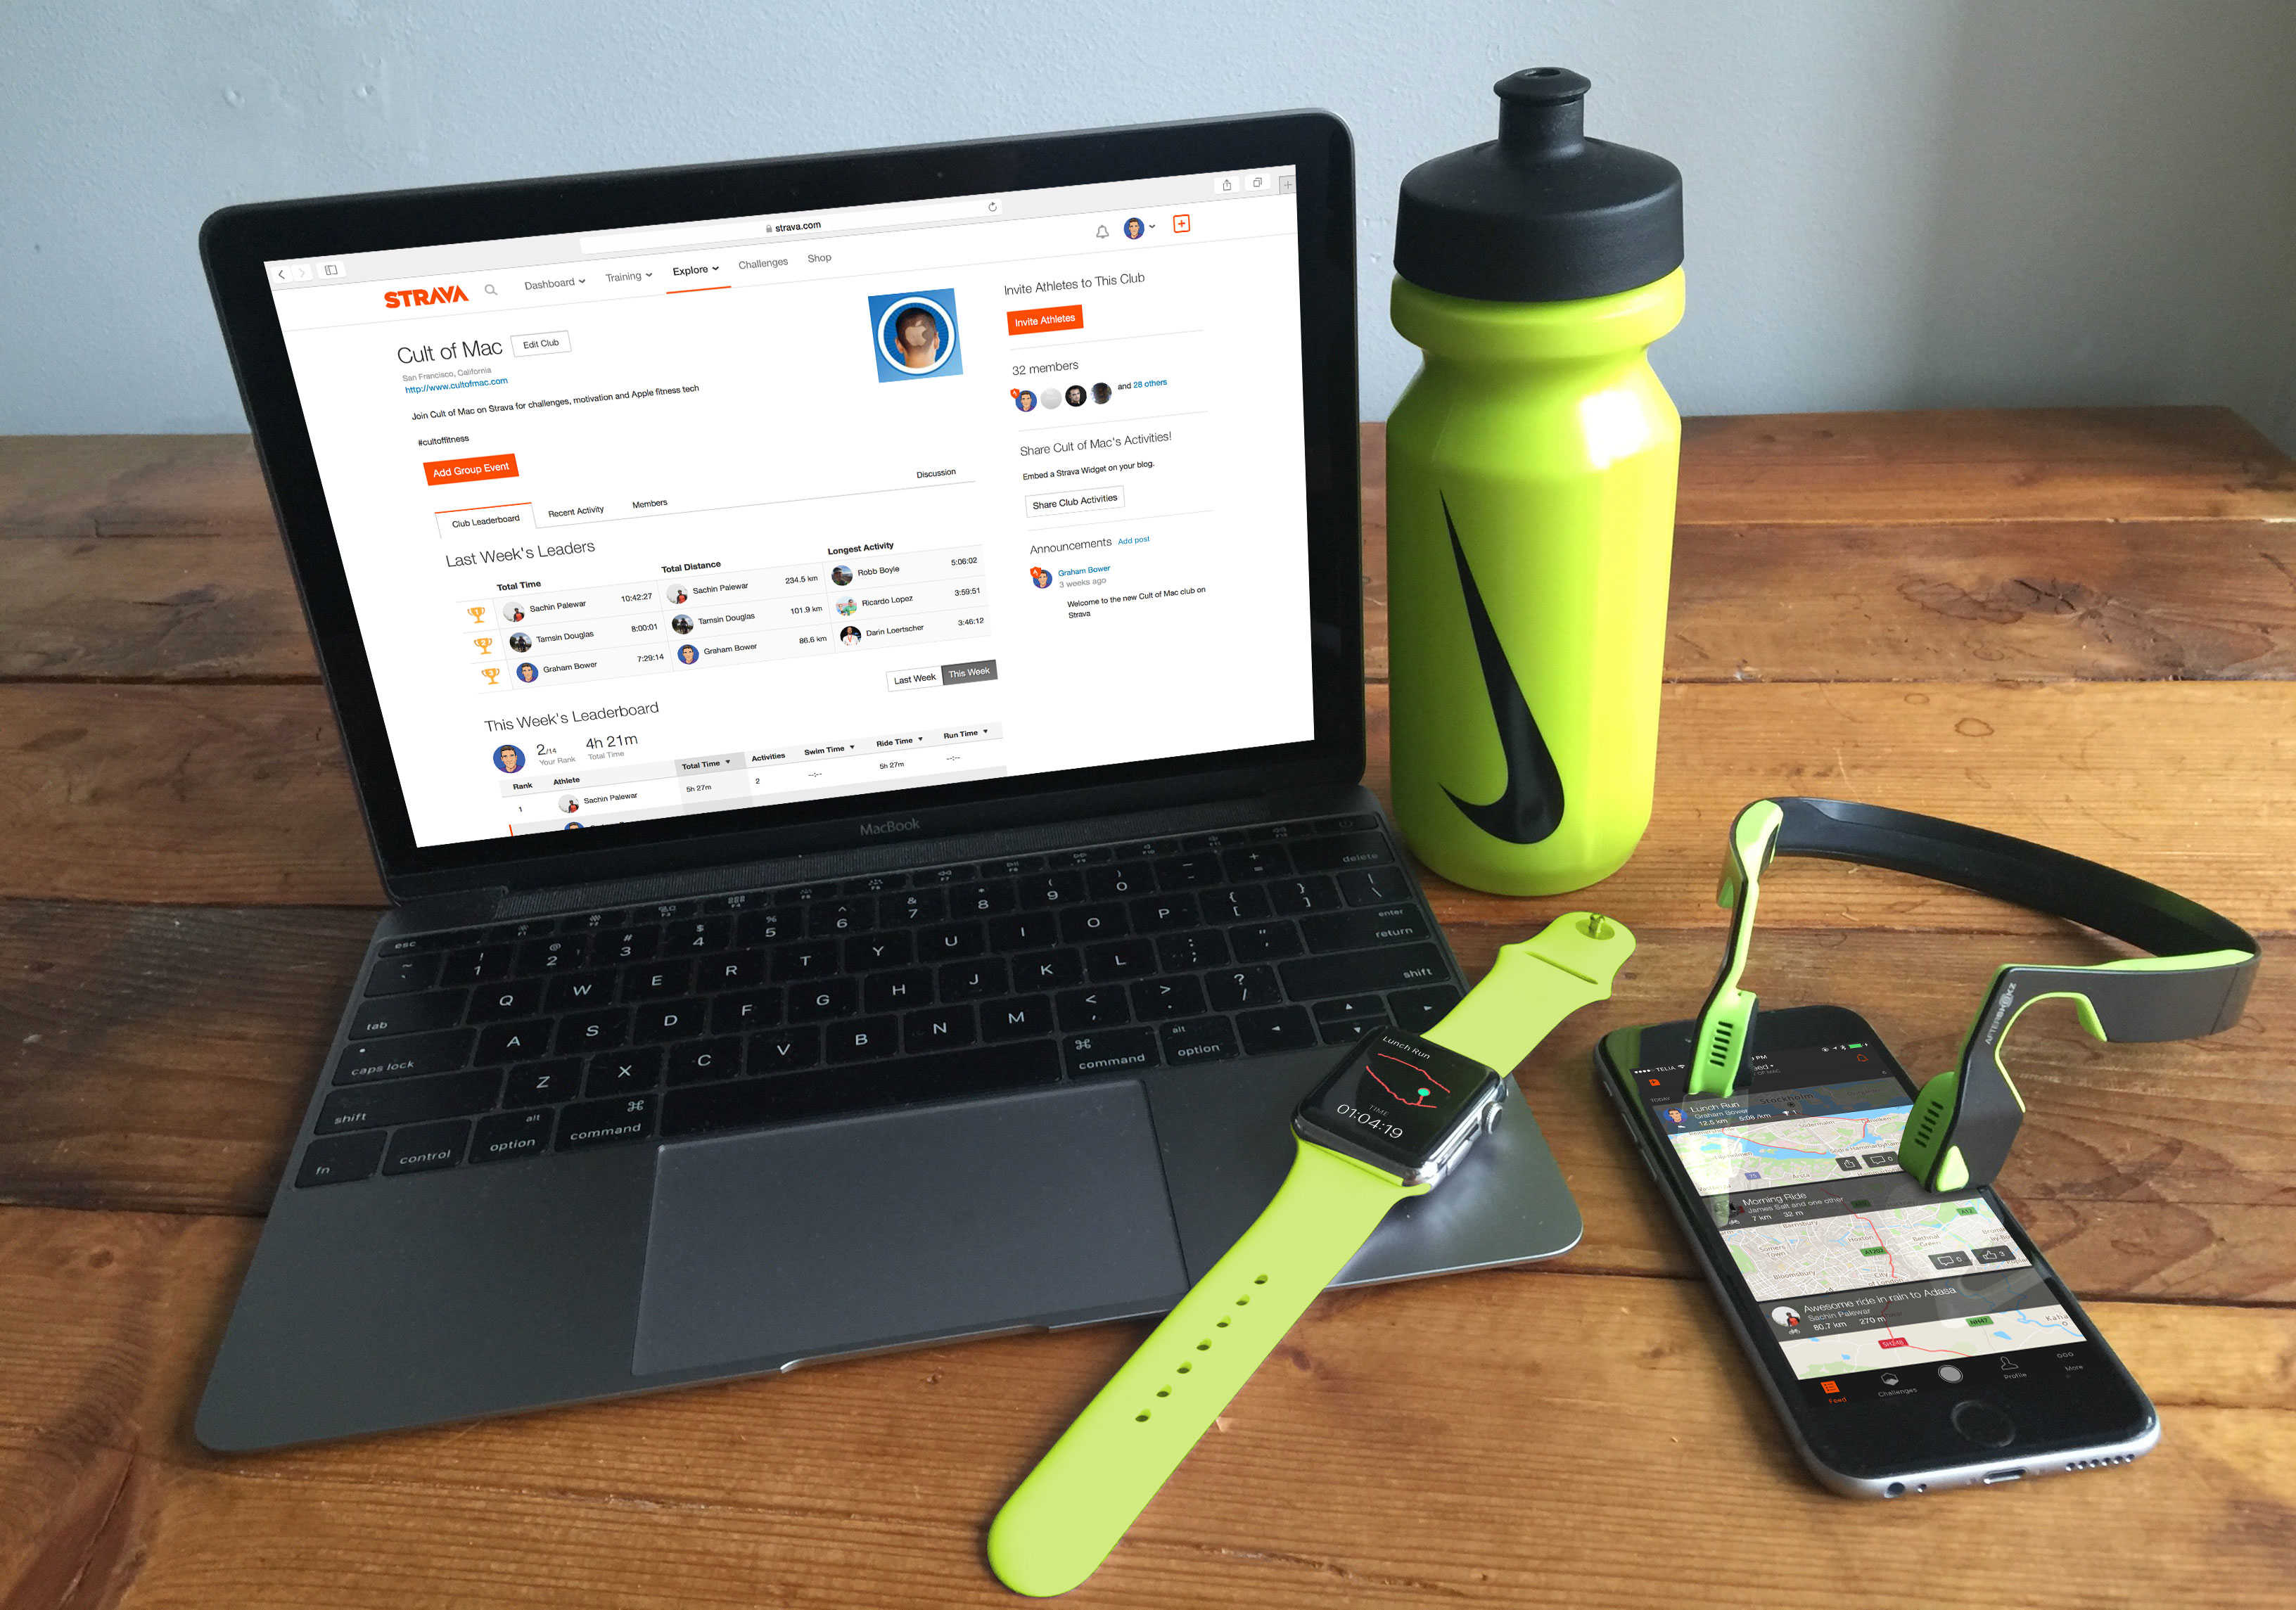 Join the Cult of Mac club on Strava and share your fitness story